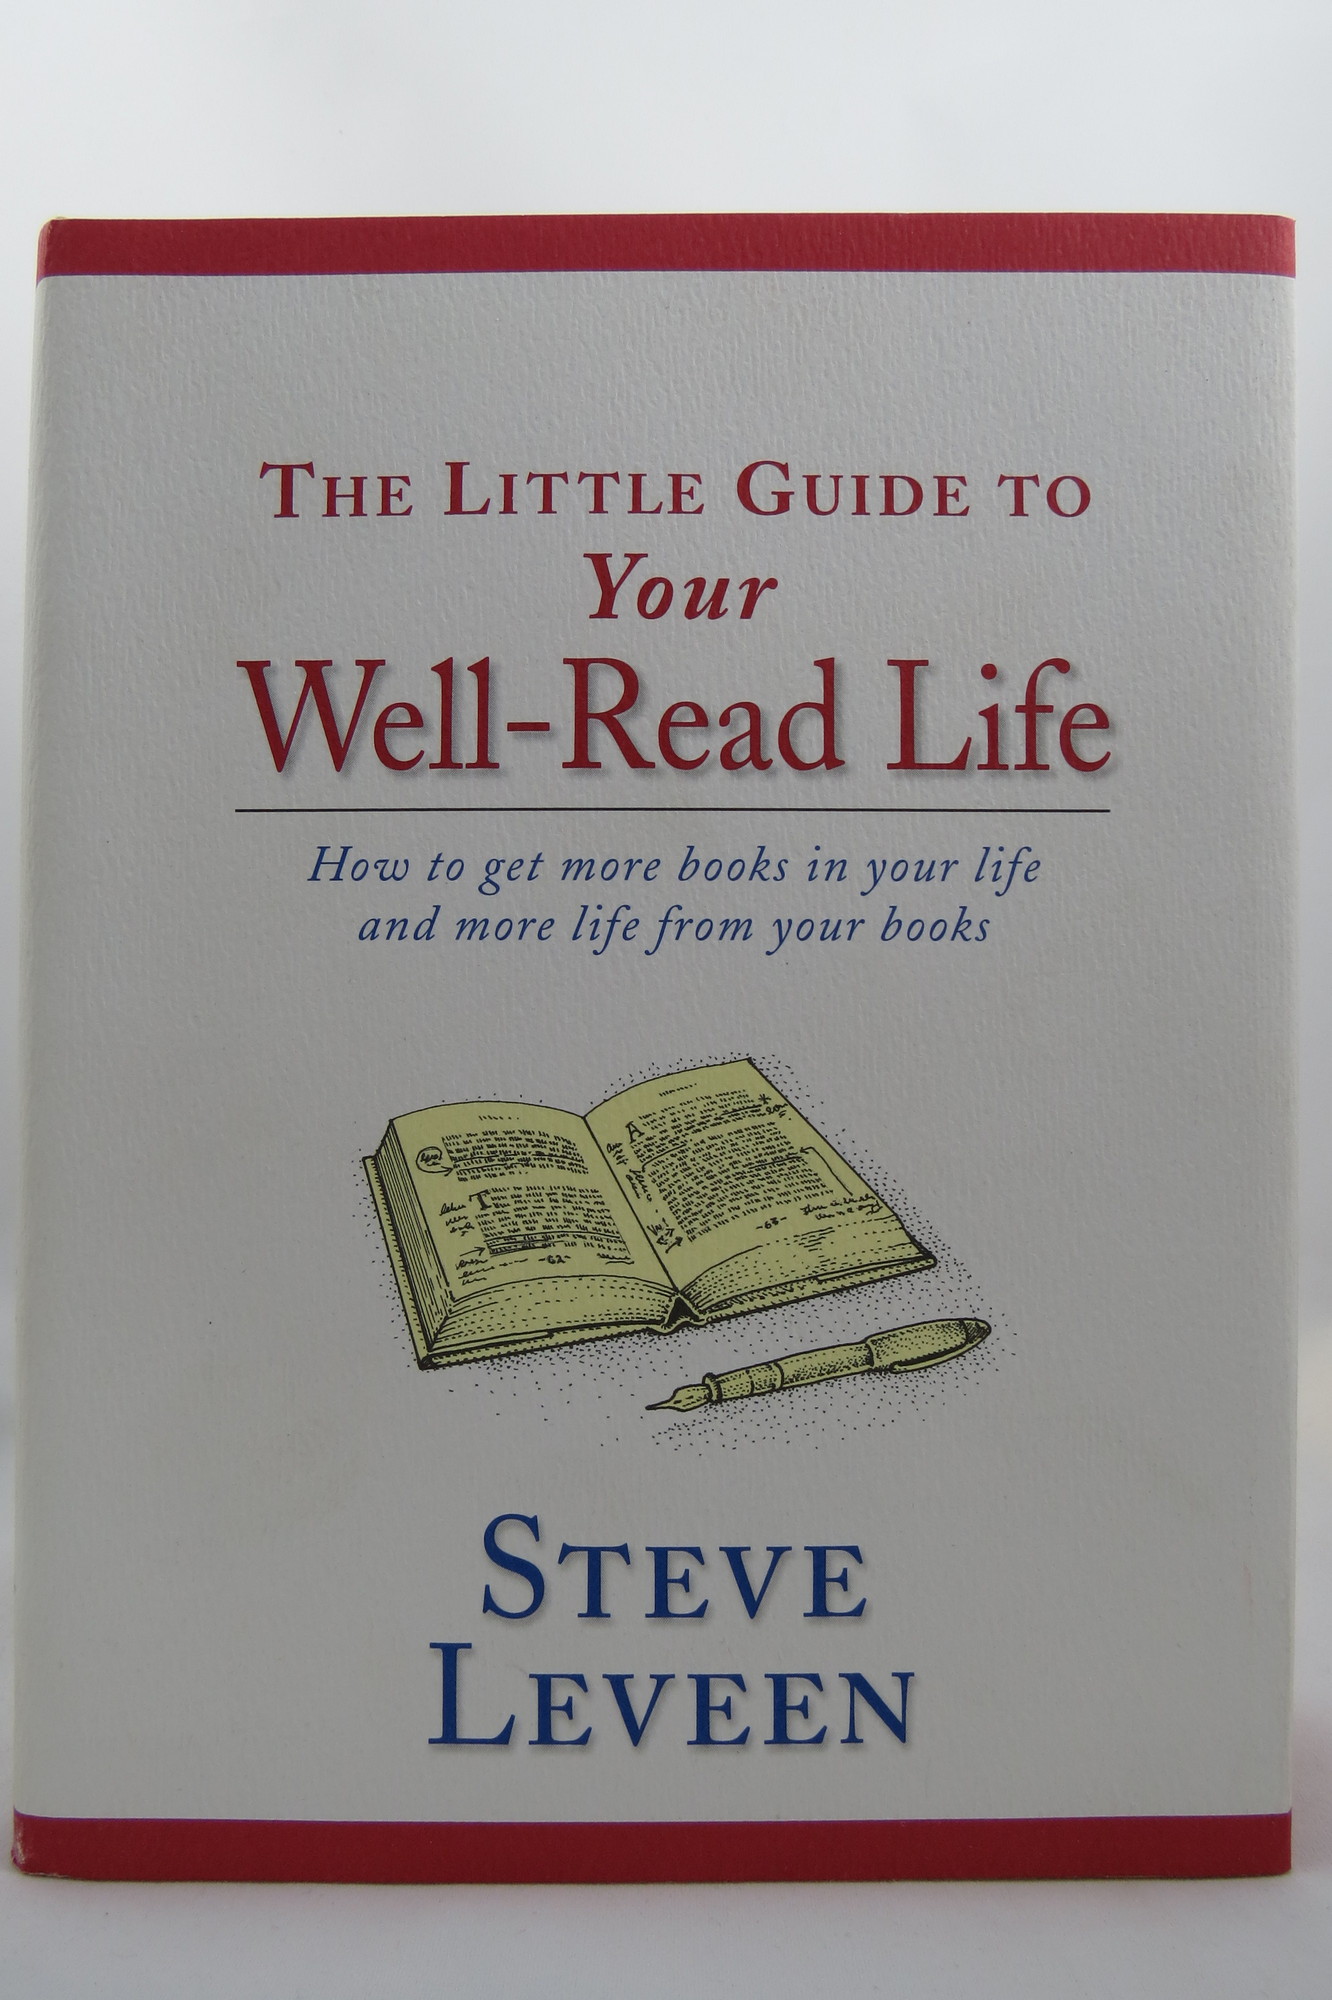 Image for THE LITTLE GUIDE TO YOUR WELL-READ LIFE (DJ protected by a brand new, clear, acid-free mylar cover) (Signed by Author)